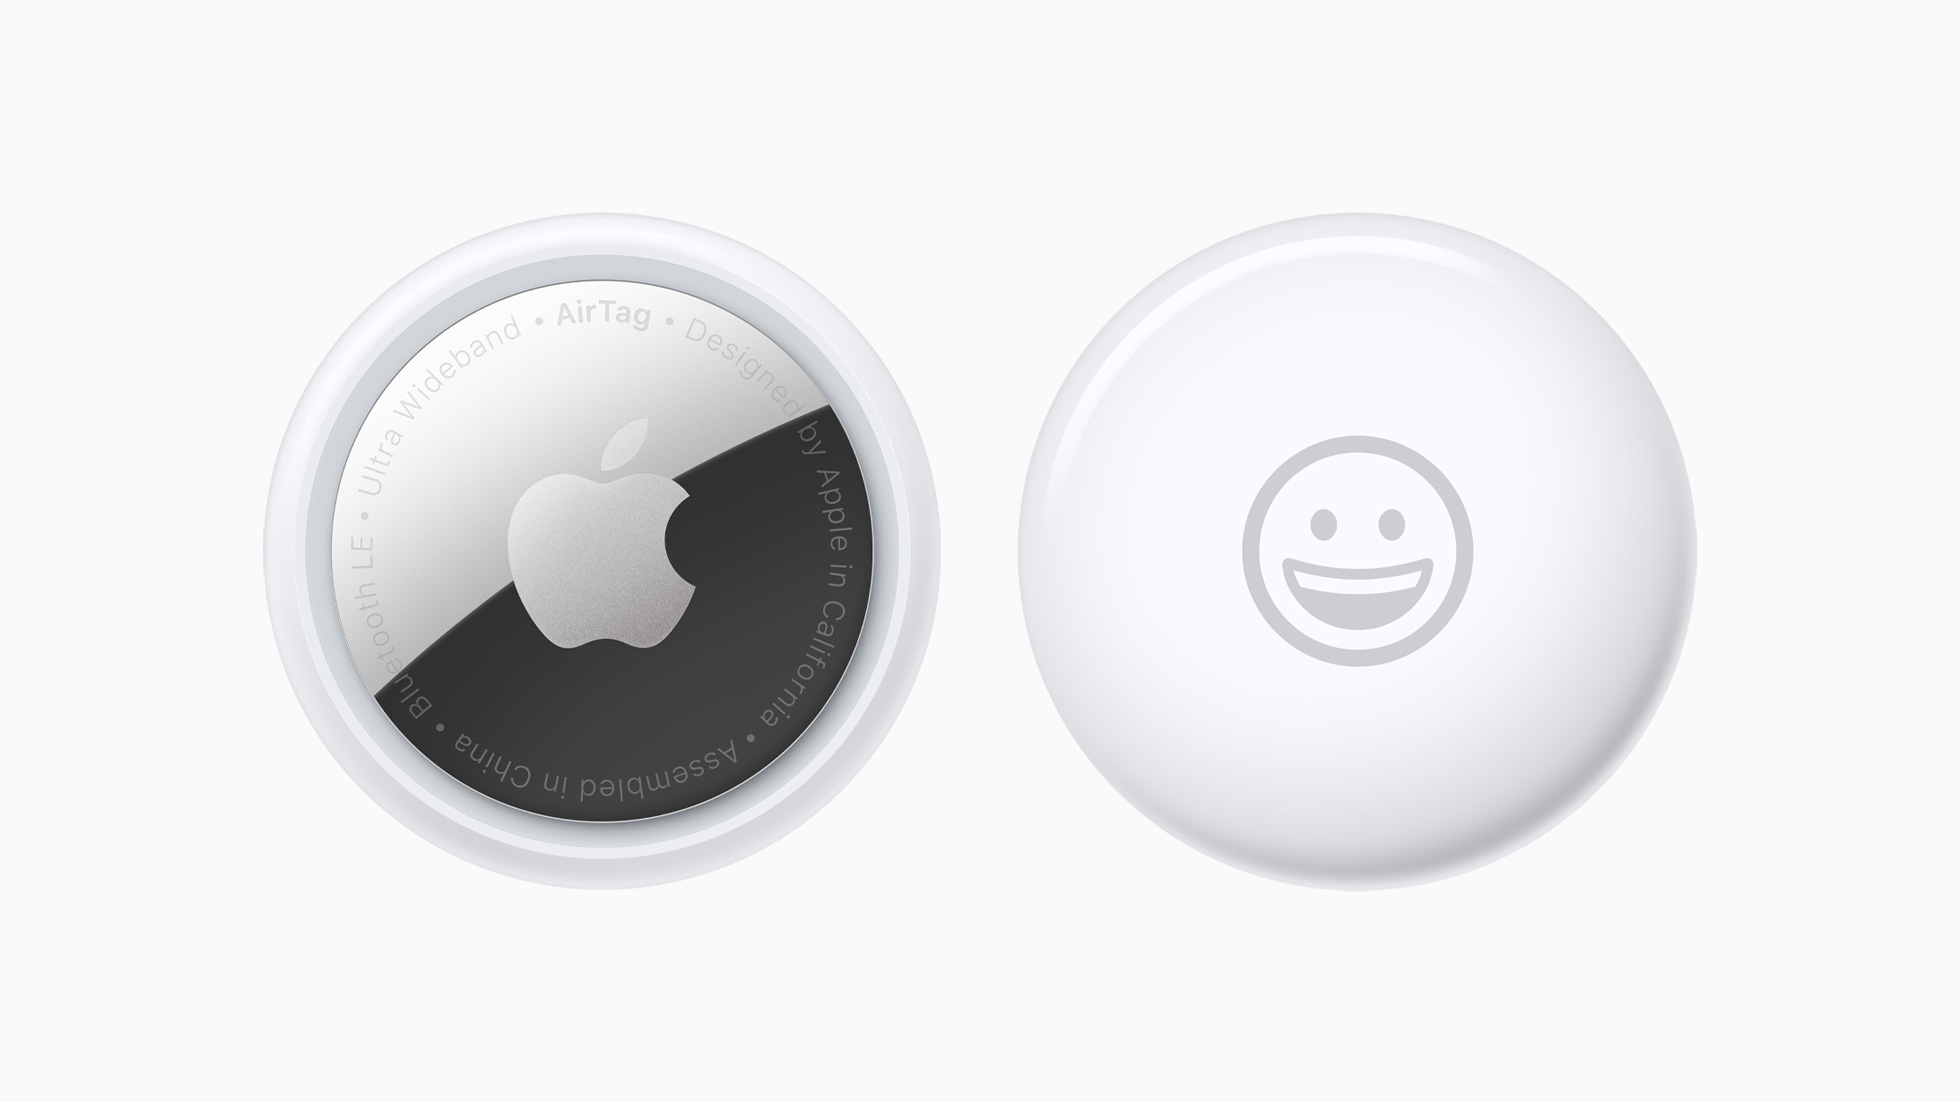 Apple_airtag-front-and-back-emoji-2up_042021_big.jpg.large_2x